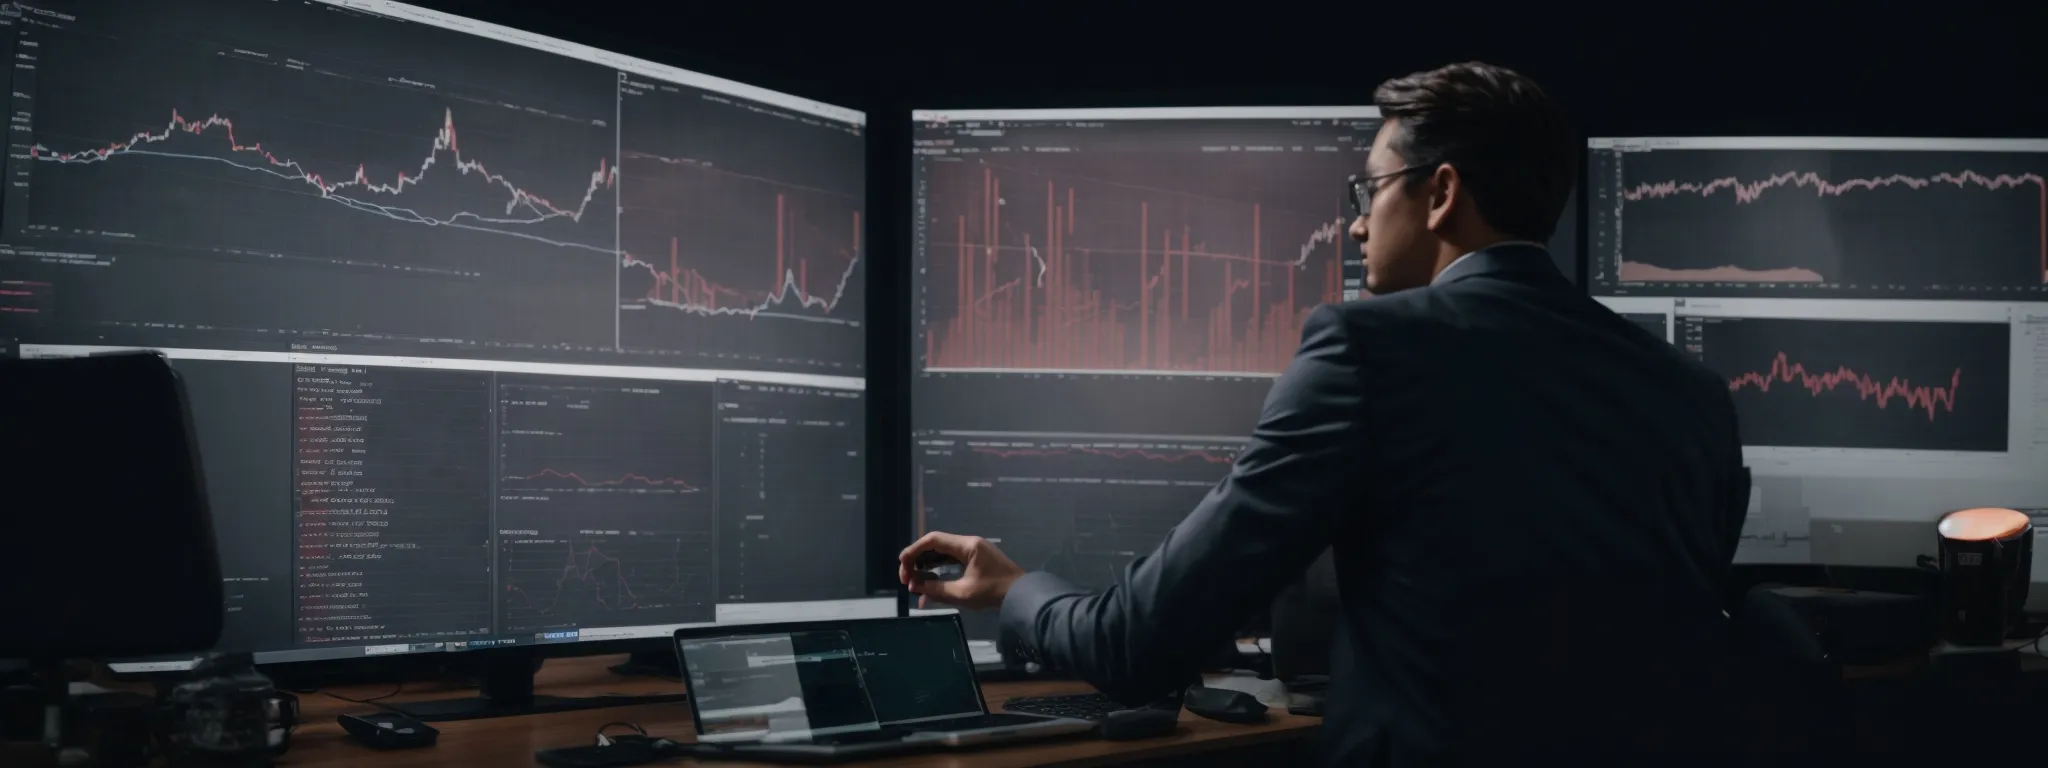 a professional seo strategist reviews charts and graphs on a large monitor, revealing search trends and user behavior data.